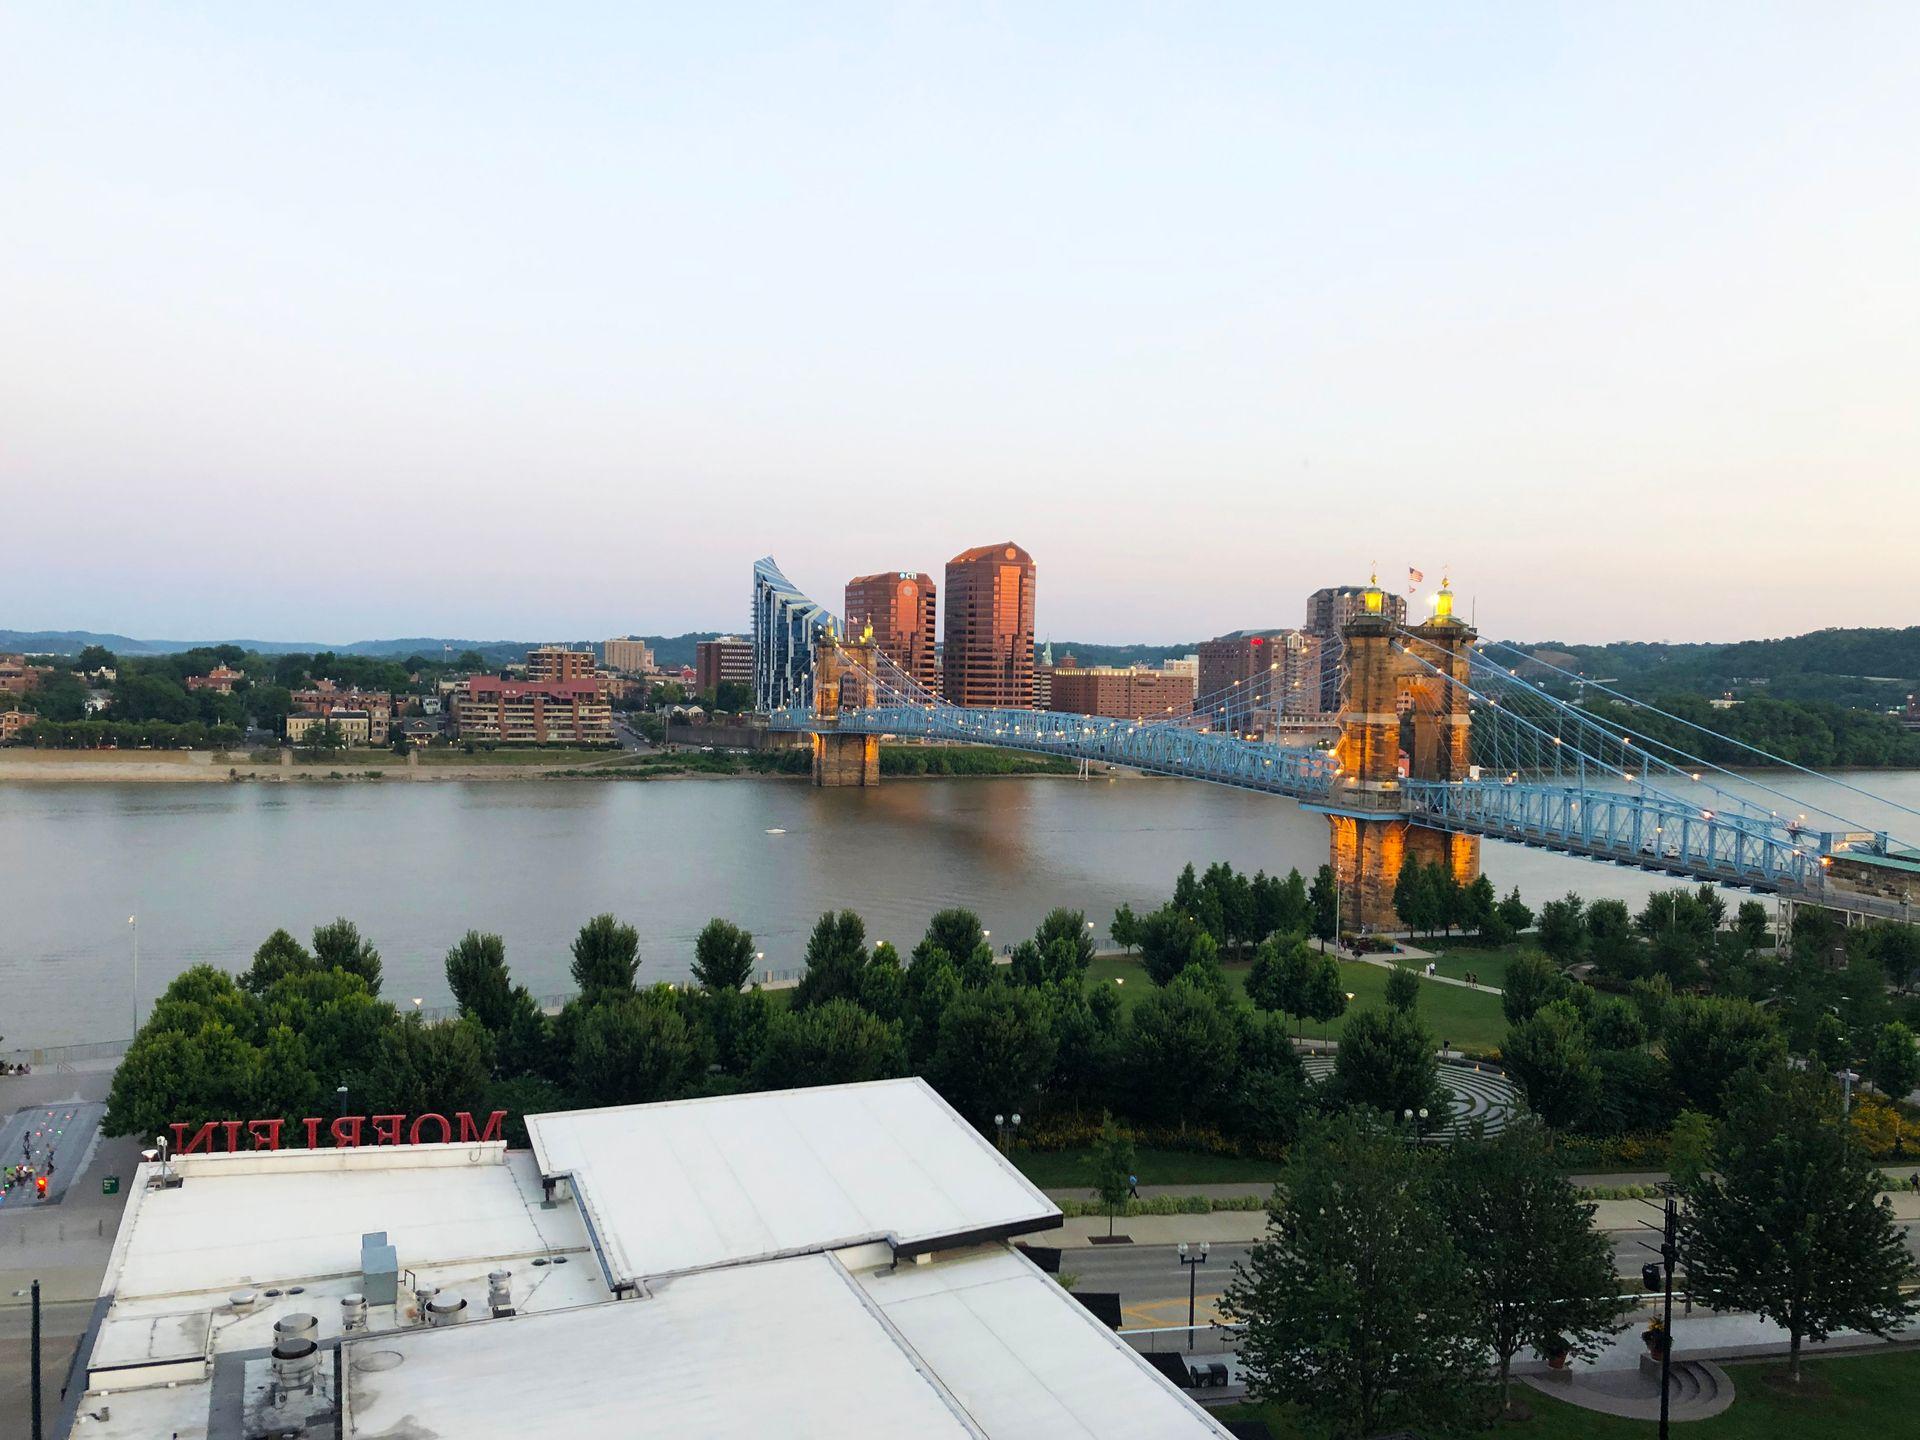 A view of the Ohio River and the Roebling Suspension Bridge from the AC Hotel Marriott.